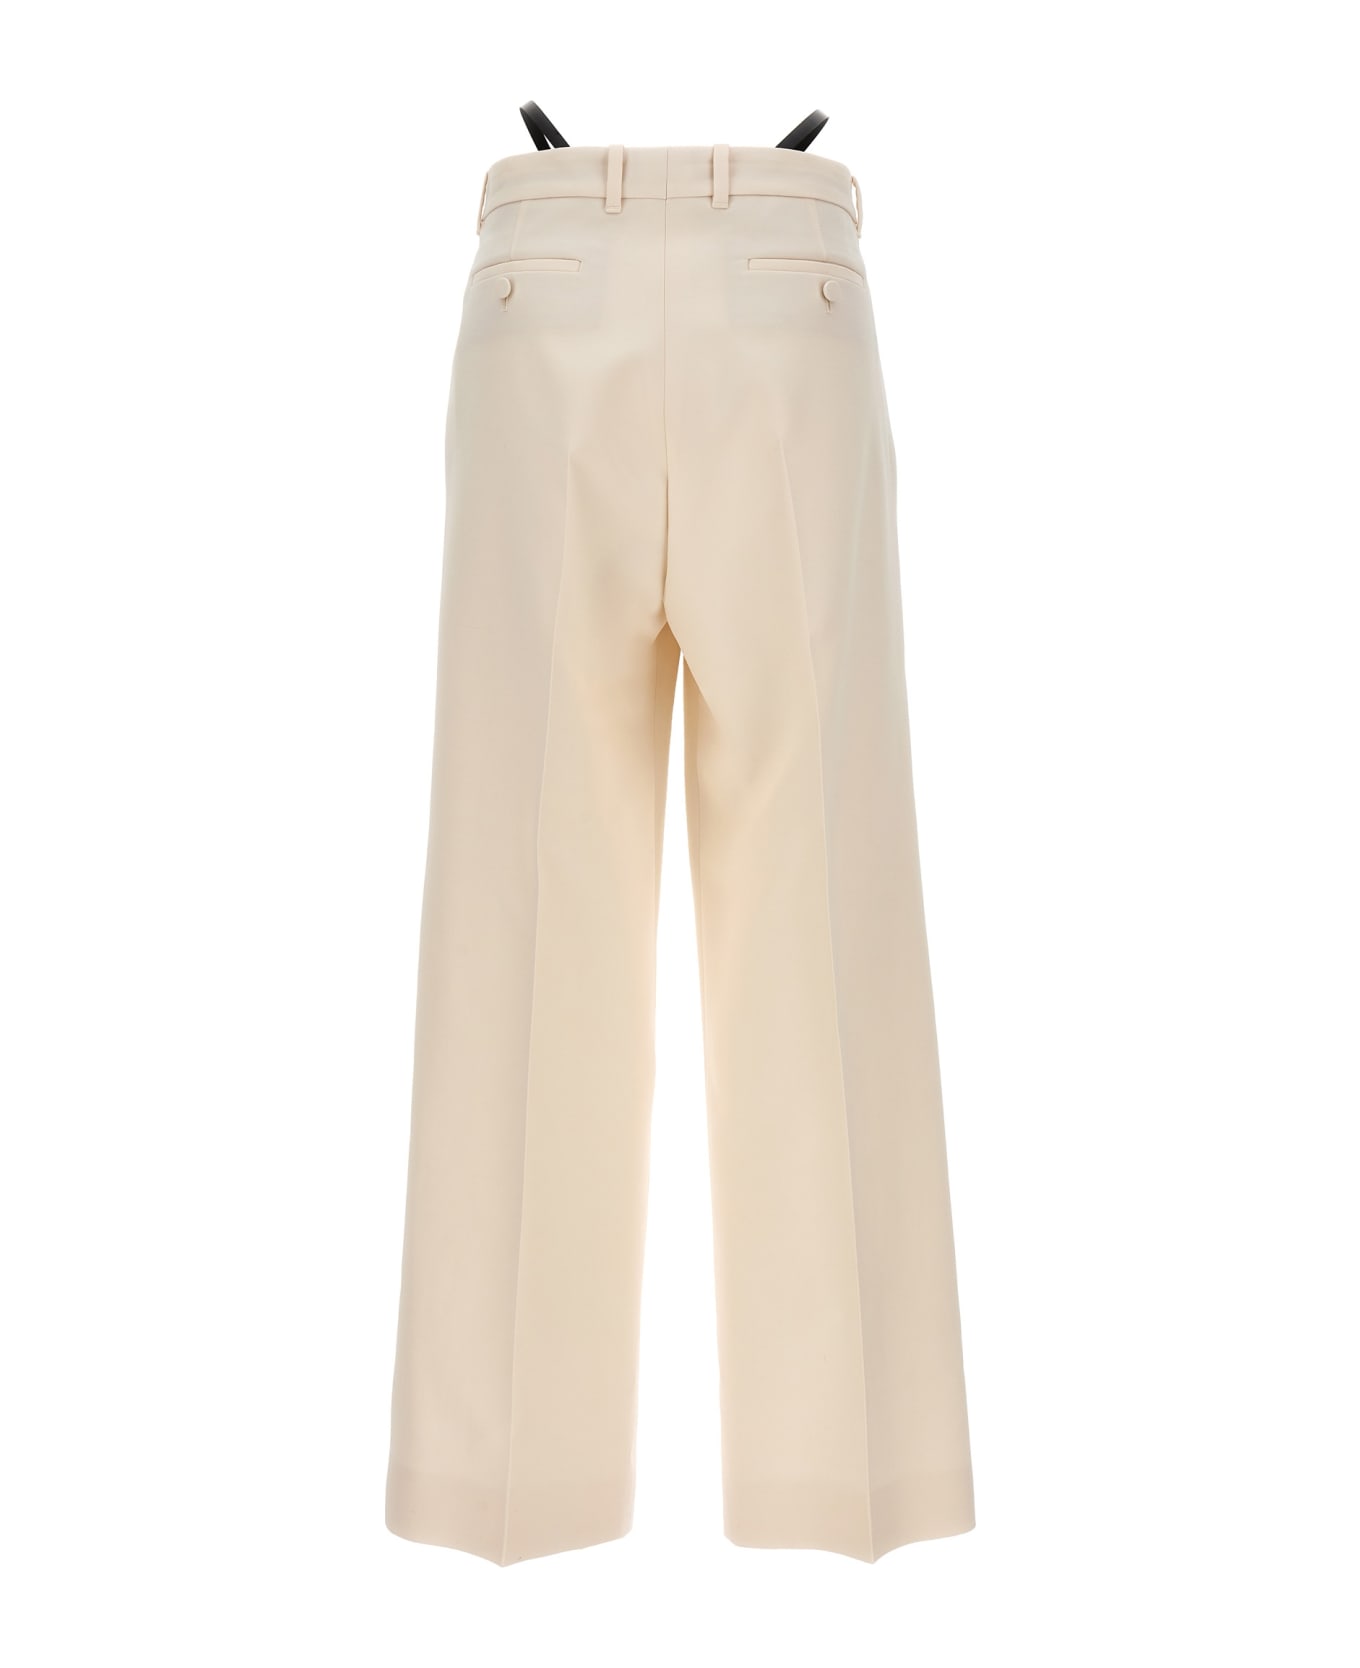 Gucci Cady Trousers - White ボトムス